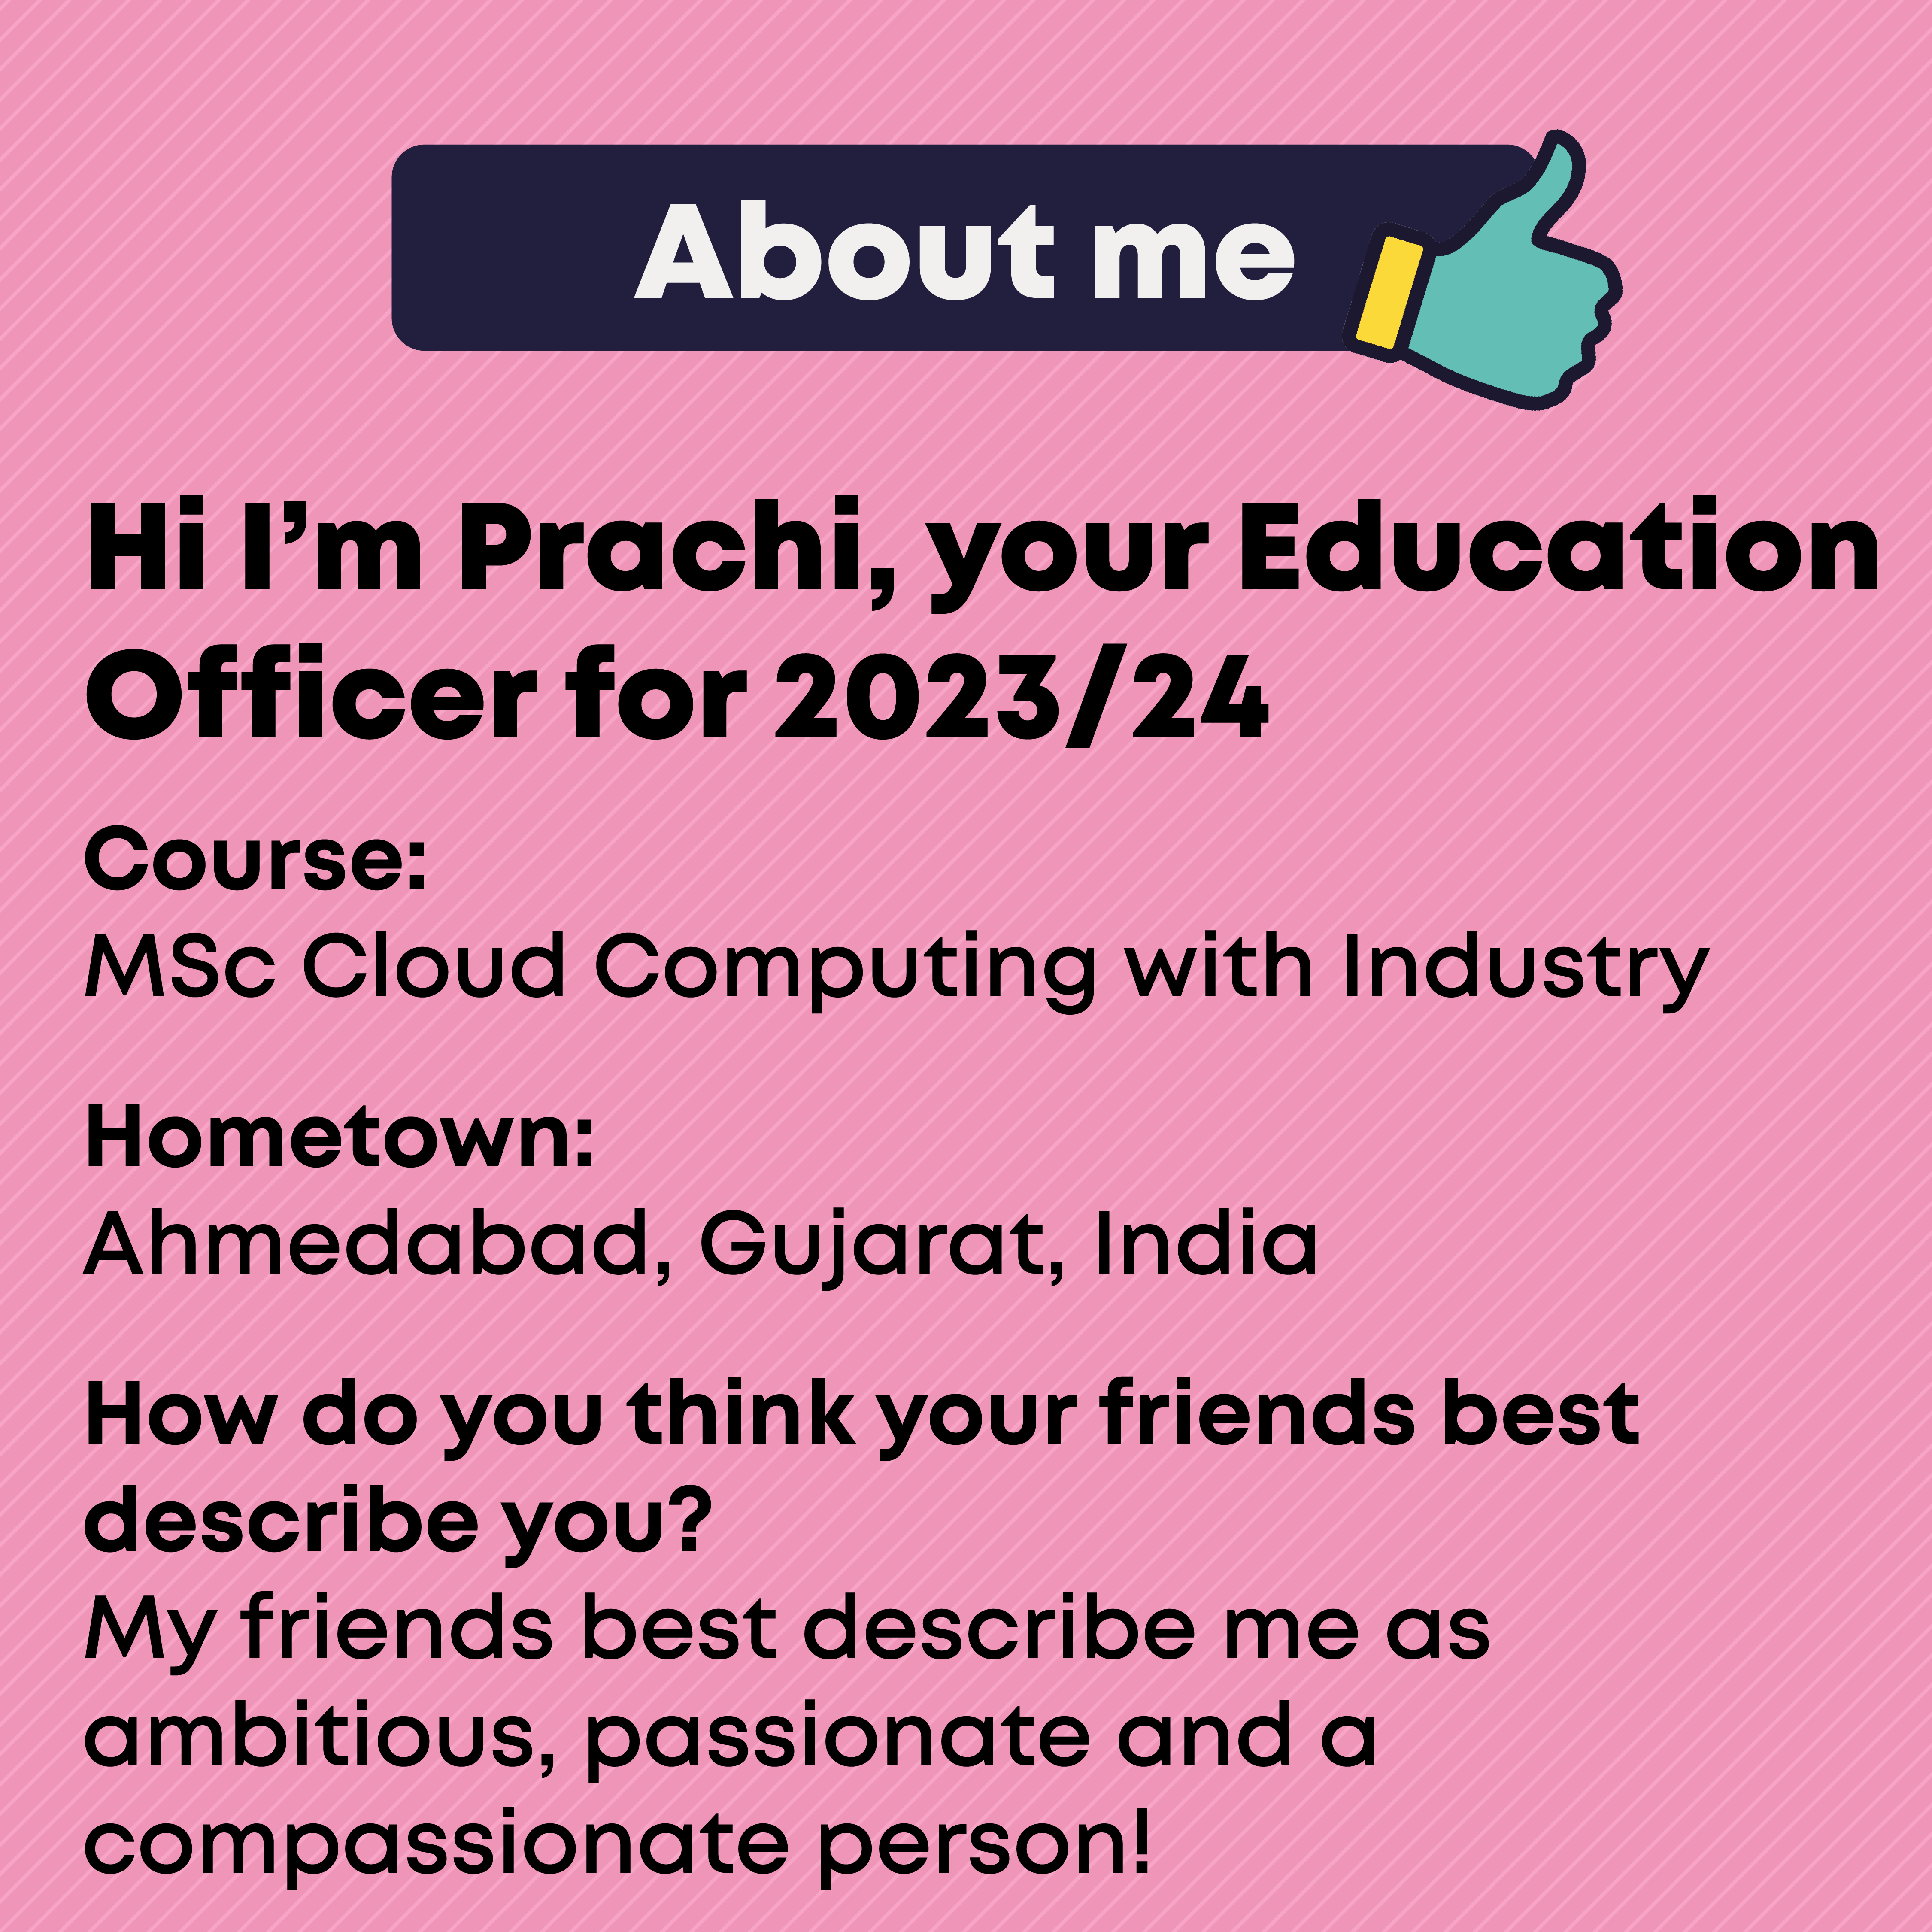 About  Course: MSc Cloud Computing with Industry  Hometown: Ahmedabad, Gujarat, India  How do you think your friends best describe you?  My friends best describe me as ambitious, passionate and a compassionate person!